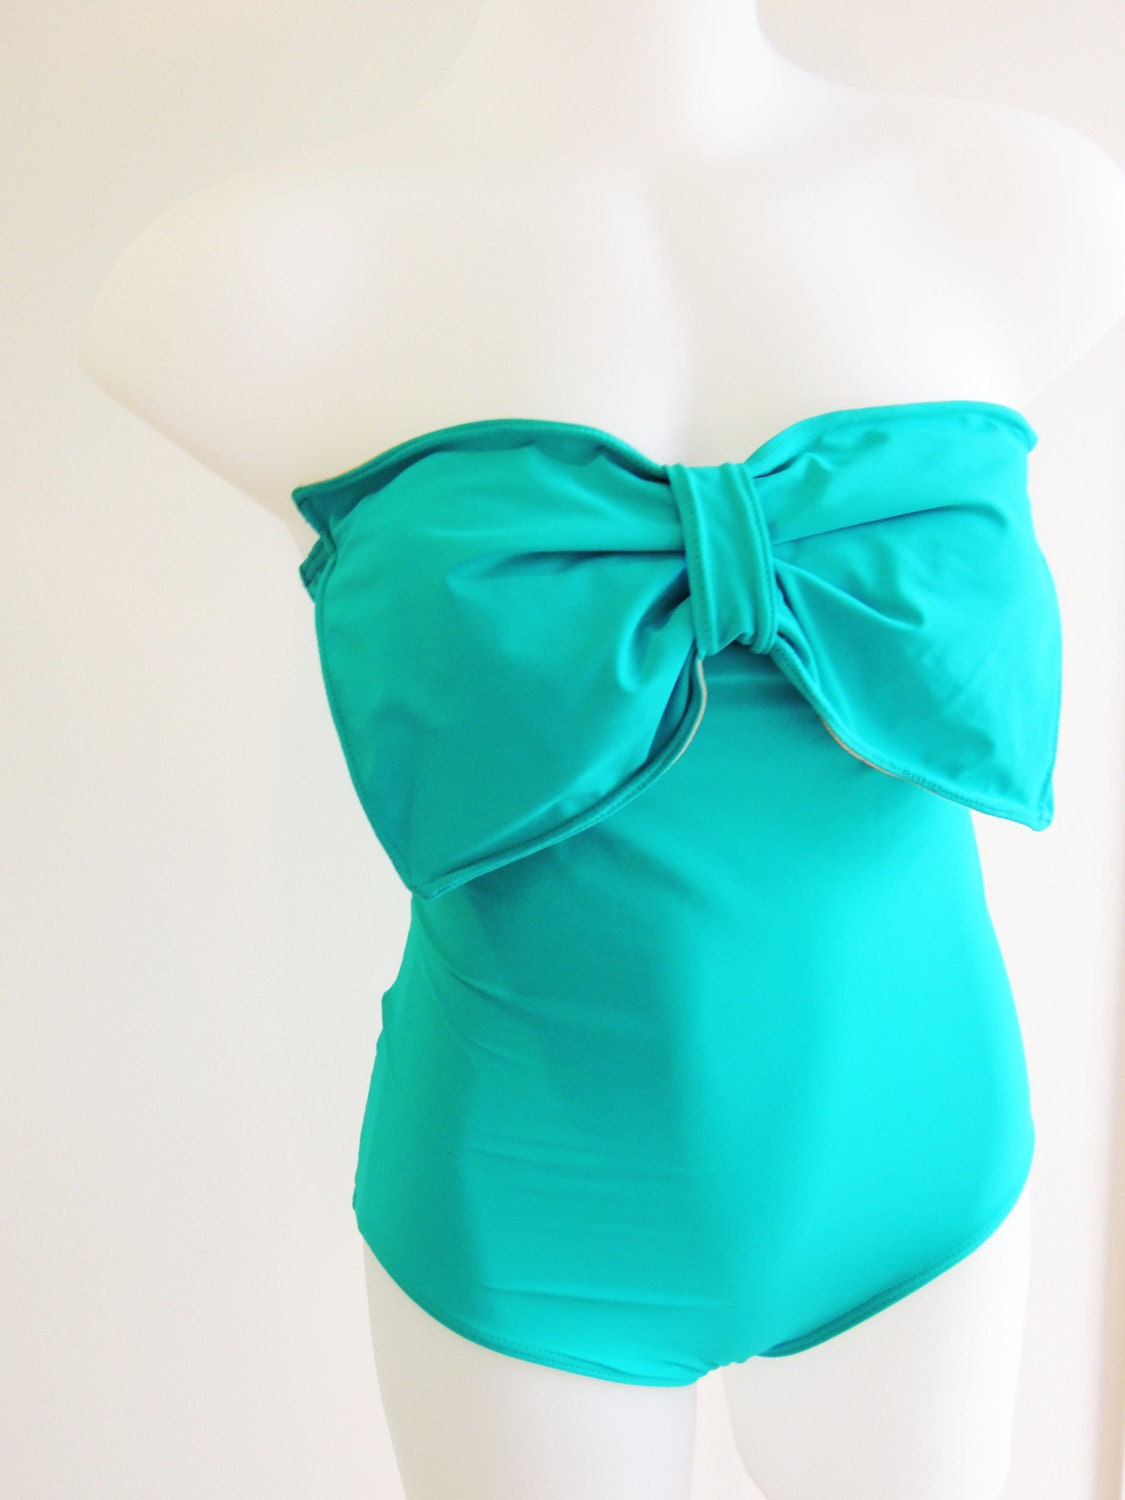 One piece Bow Swimsuit vintage inspired bodysuit Teal Green